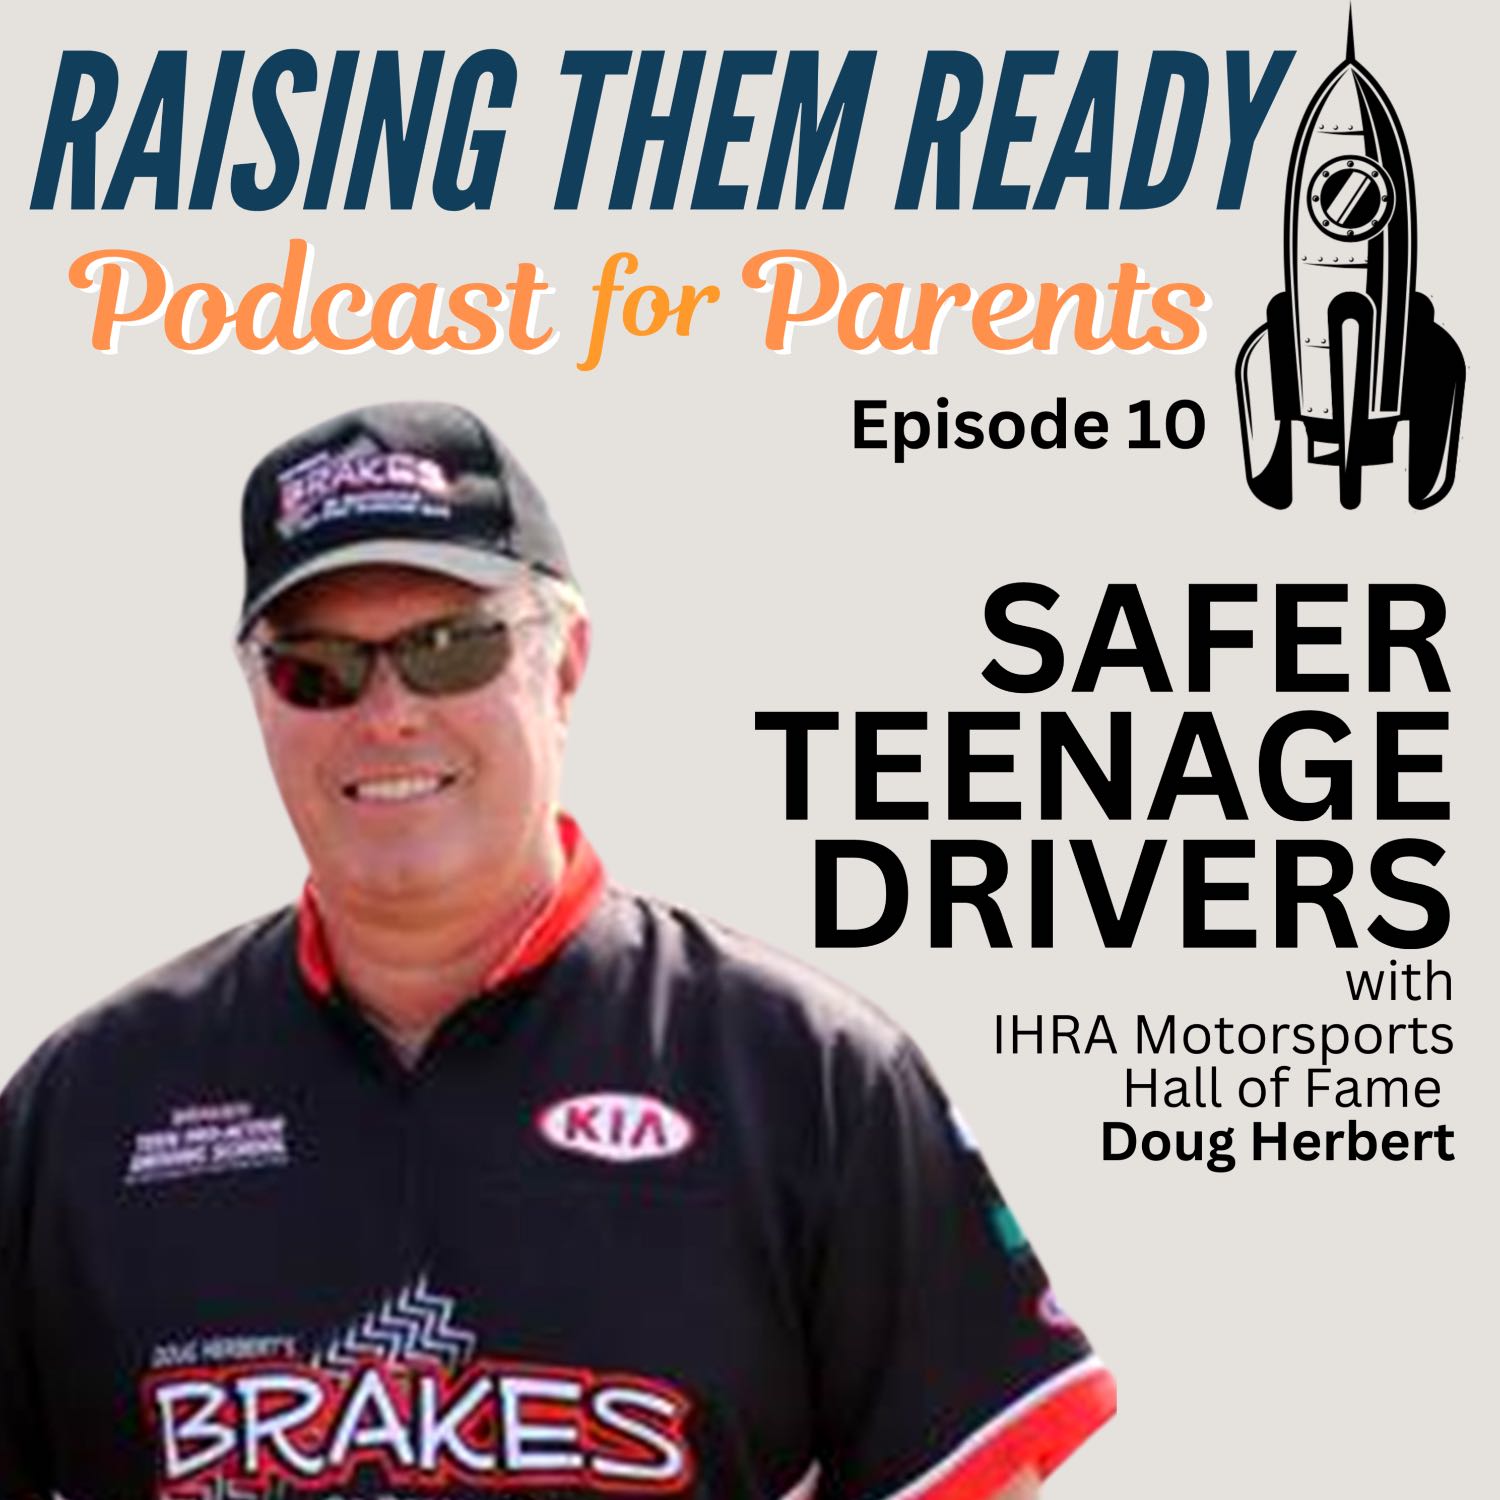 Safer Teenage Drivers, with guest IHRA Motorsports Hall of Fame - Doug Herbert